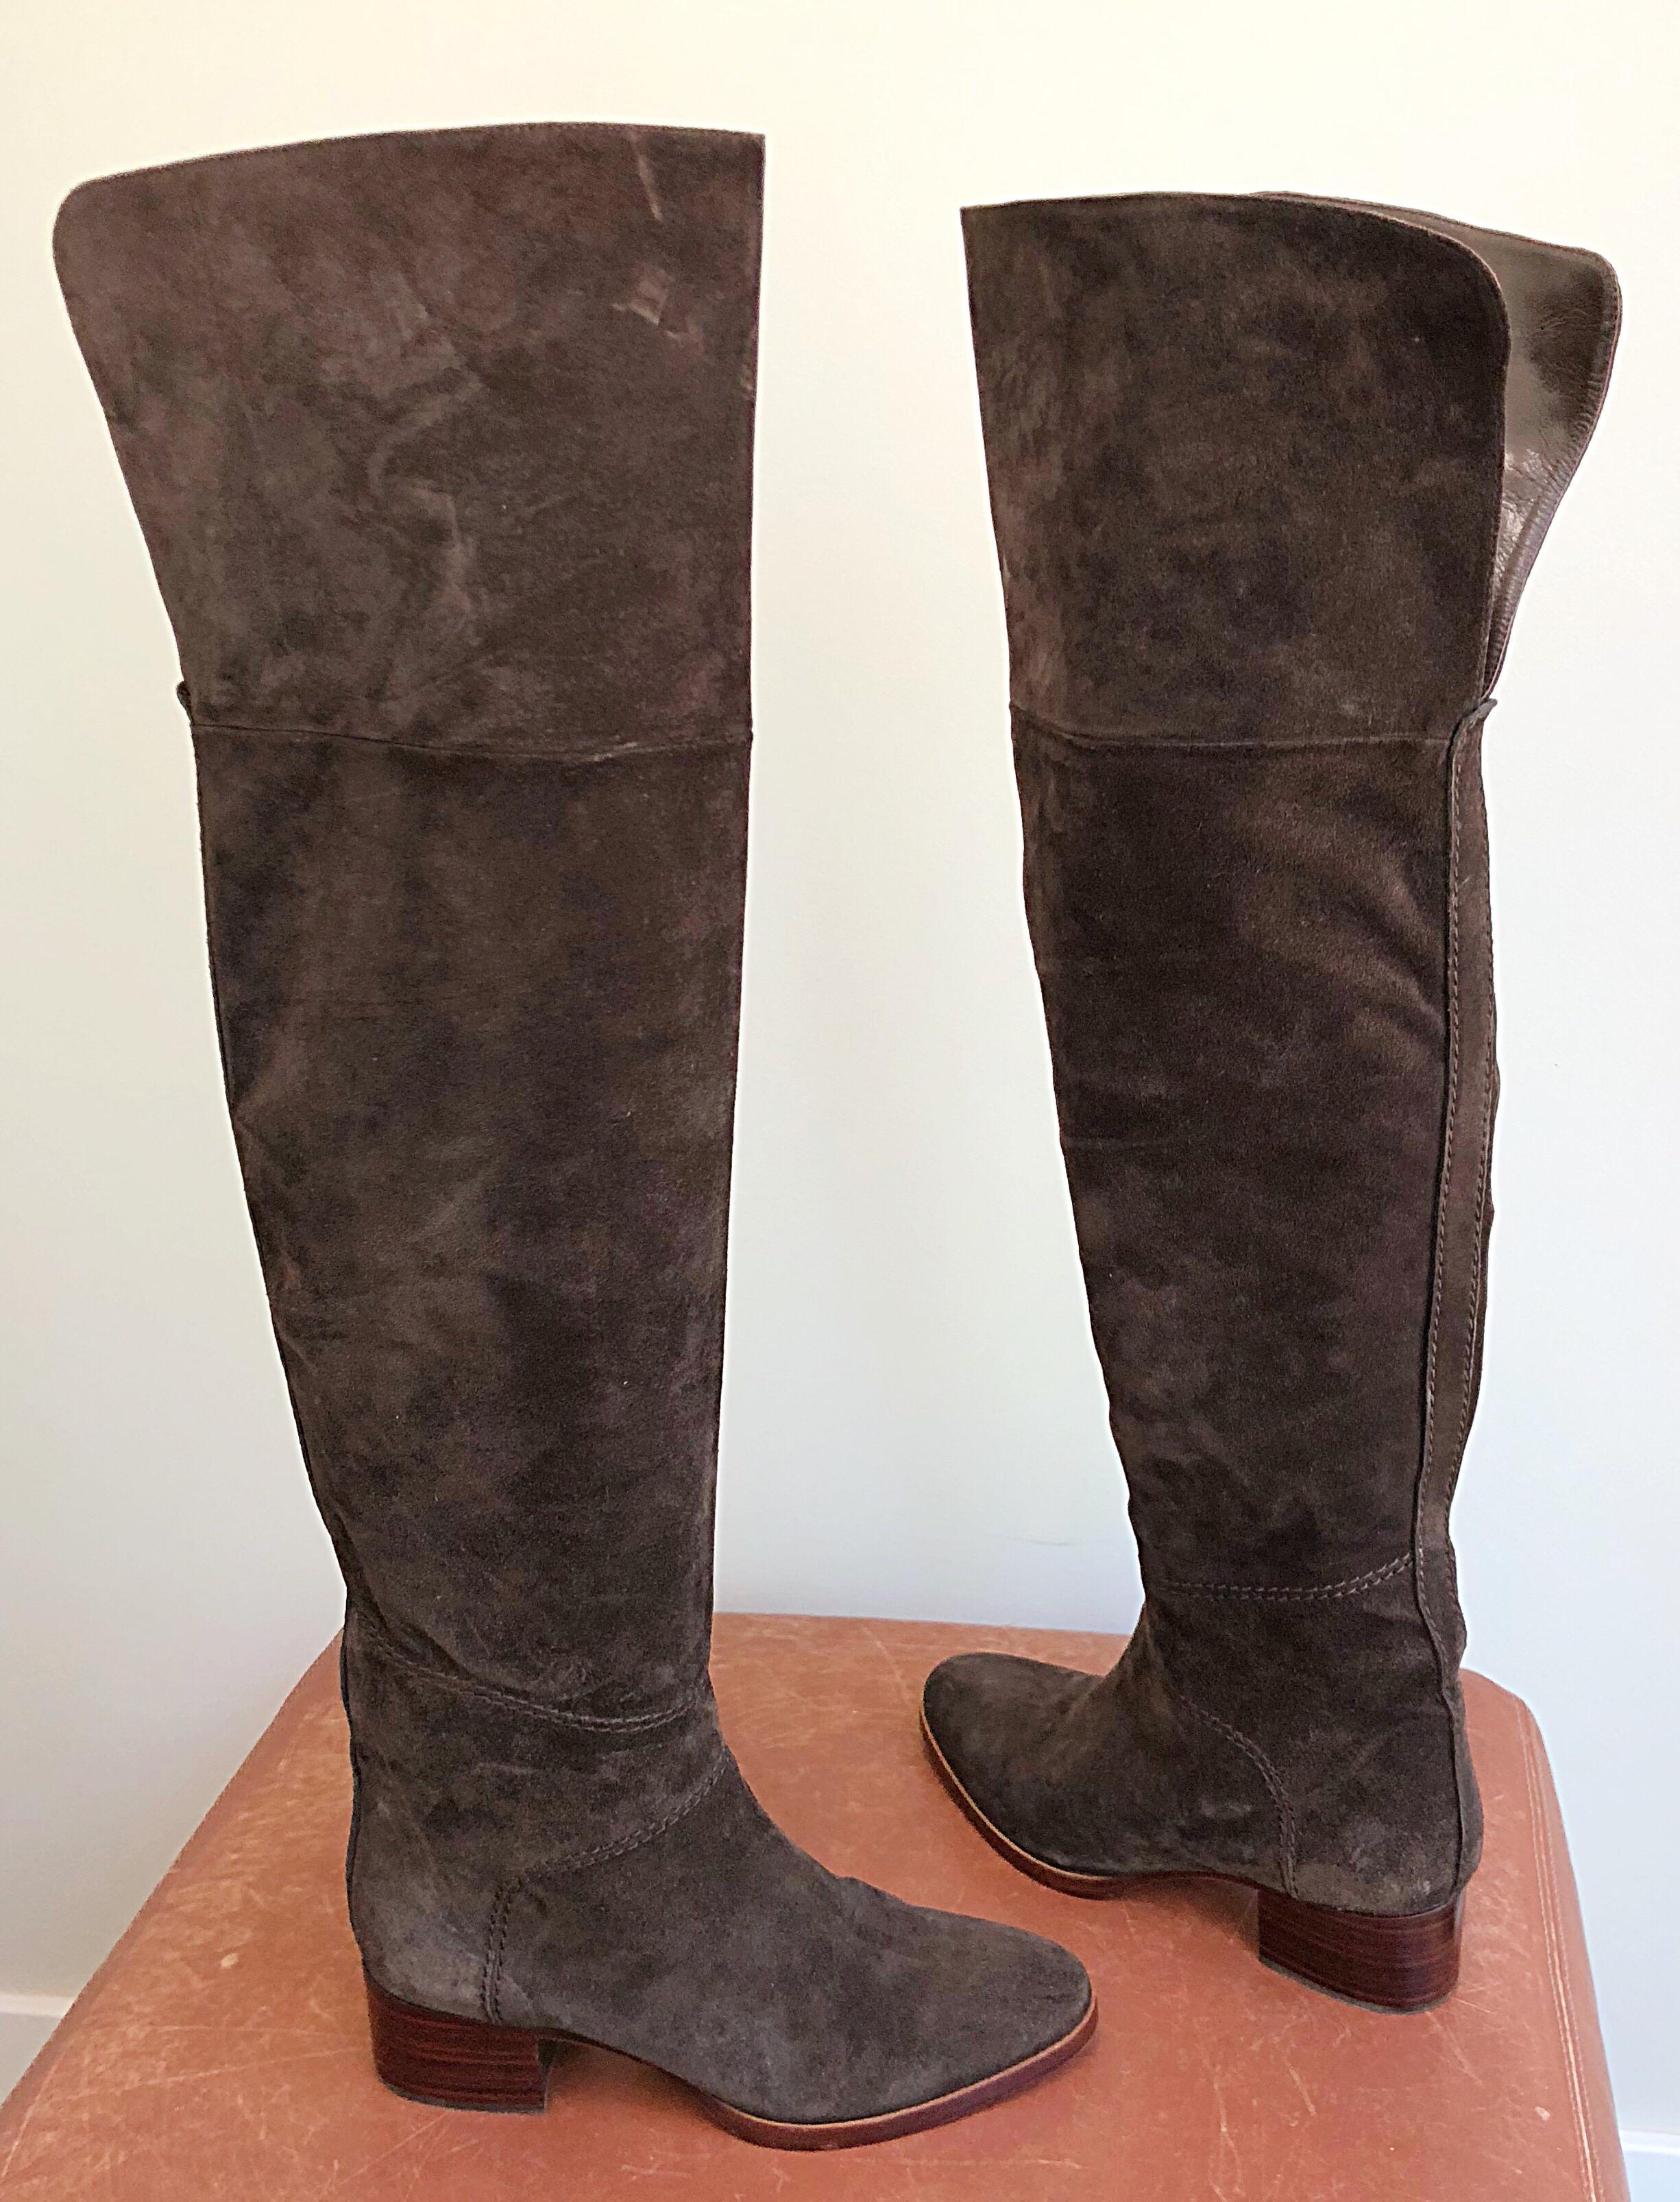 New Chloe Size 37 / 7 Brown Suede Leather Over The Knee Riding Boots For Sale 2